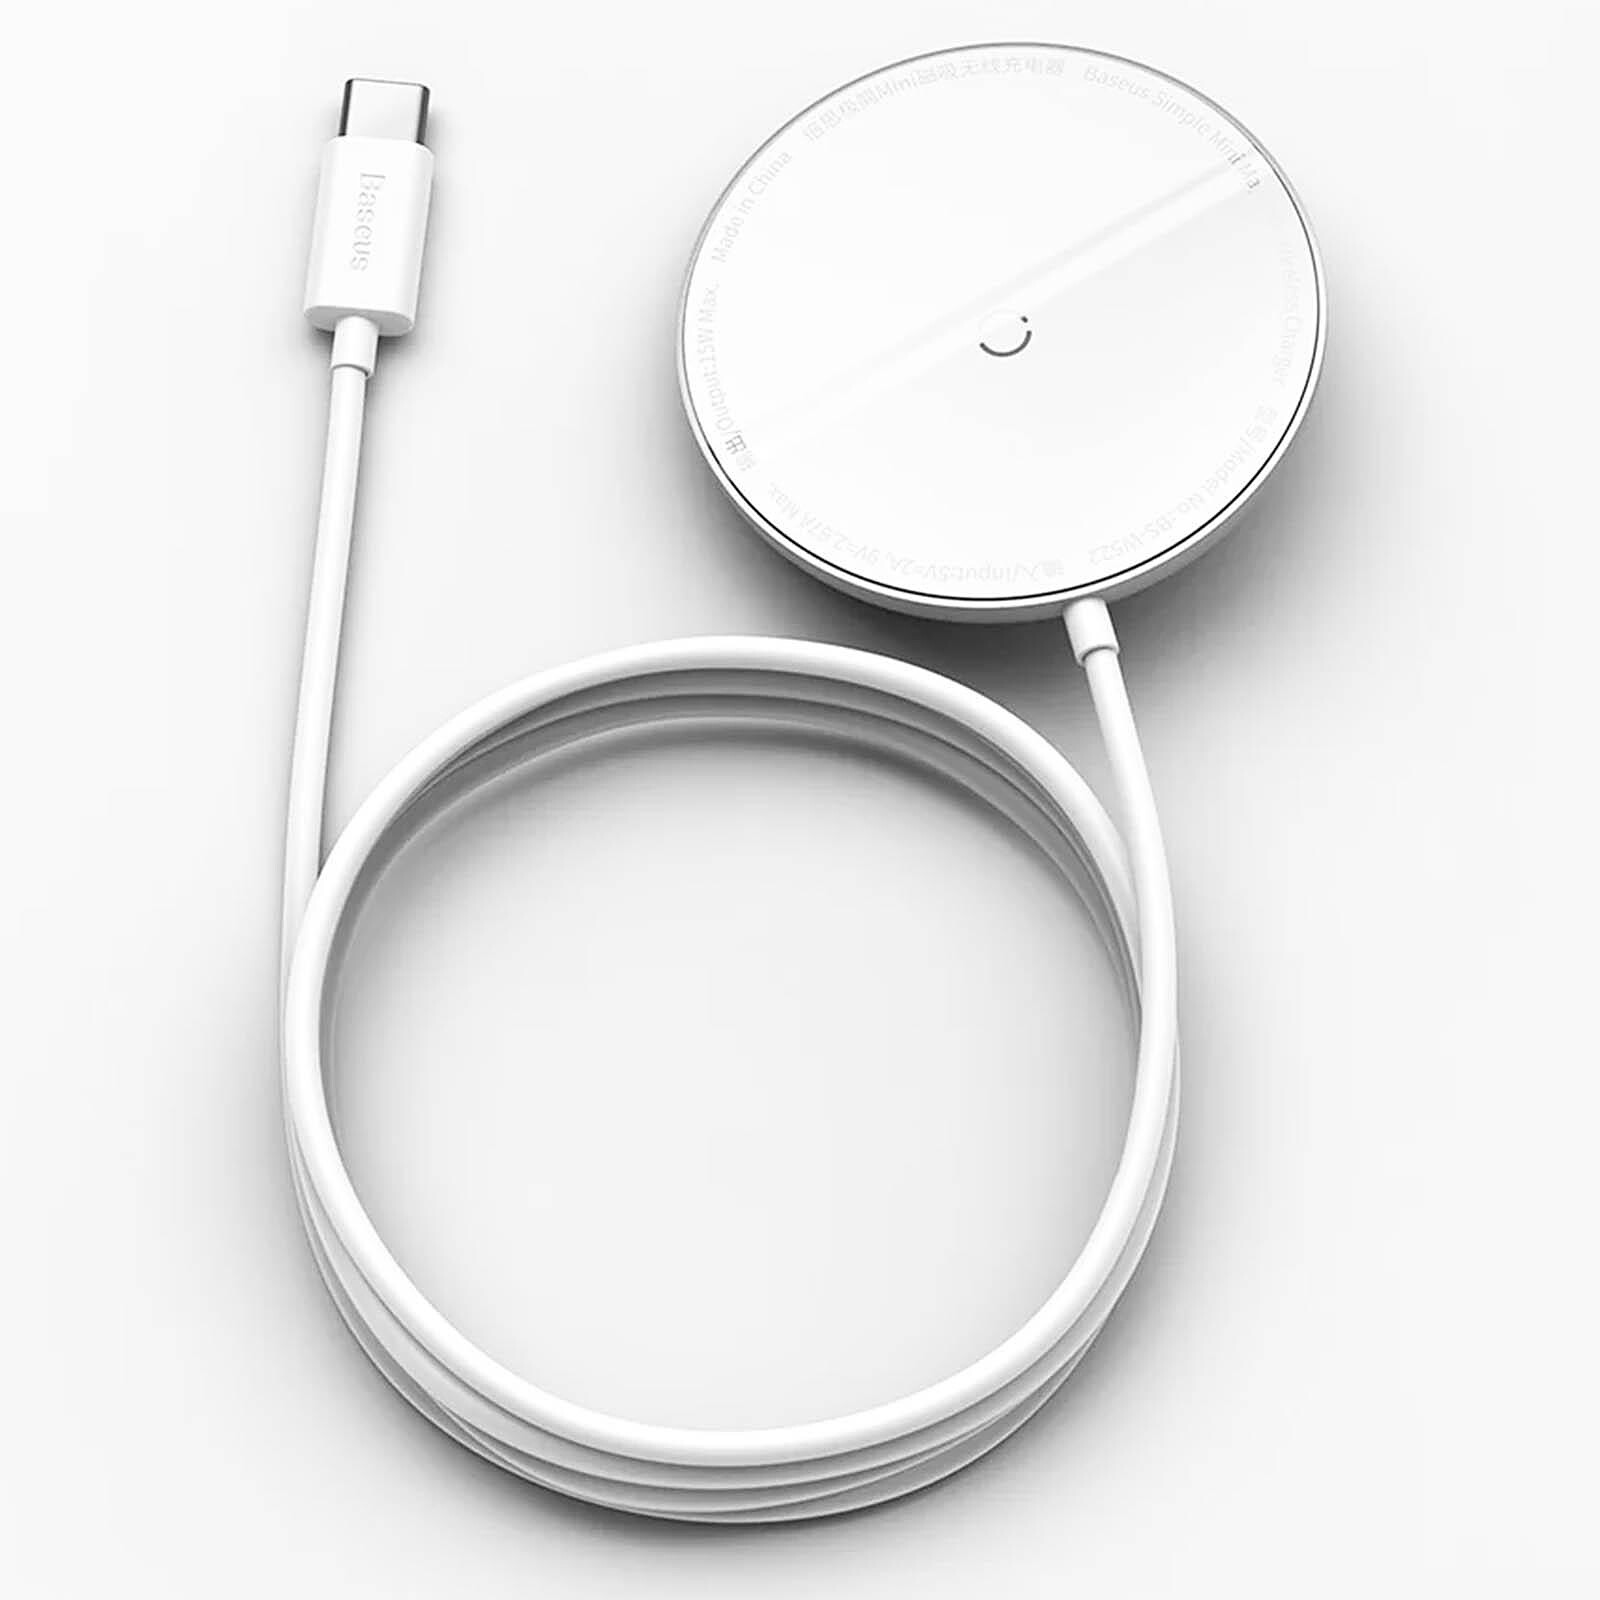 Tiger TIGER POWER PACK SUPPORT CHARGEUR MAGSAFE & AIRPODS 20W sur